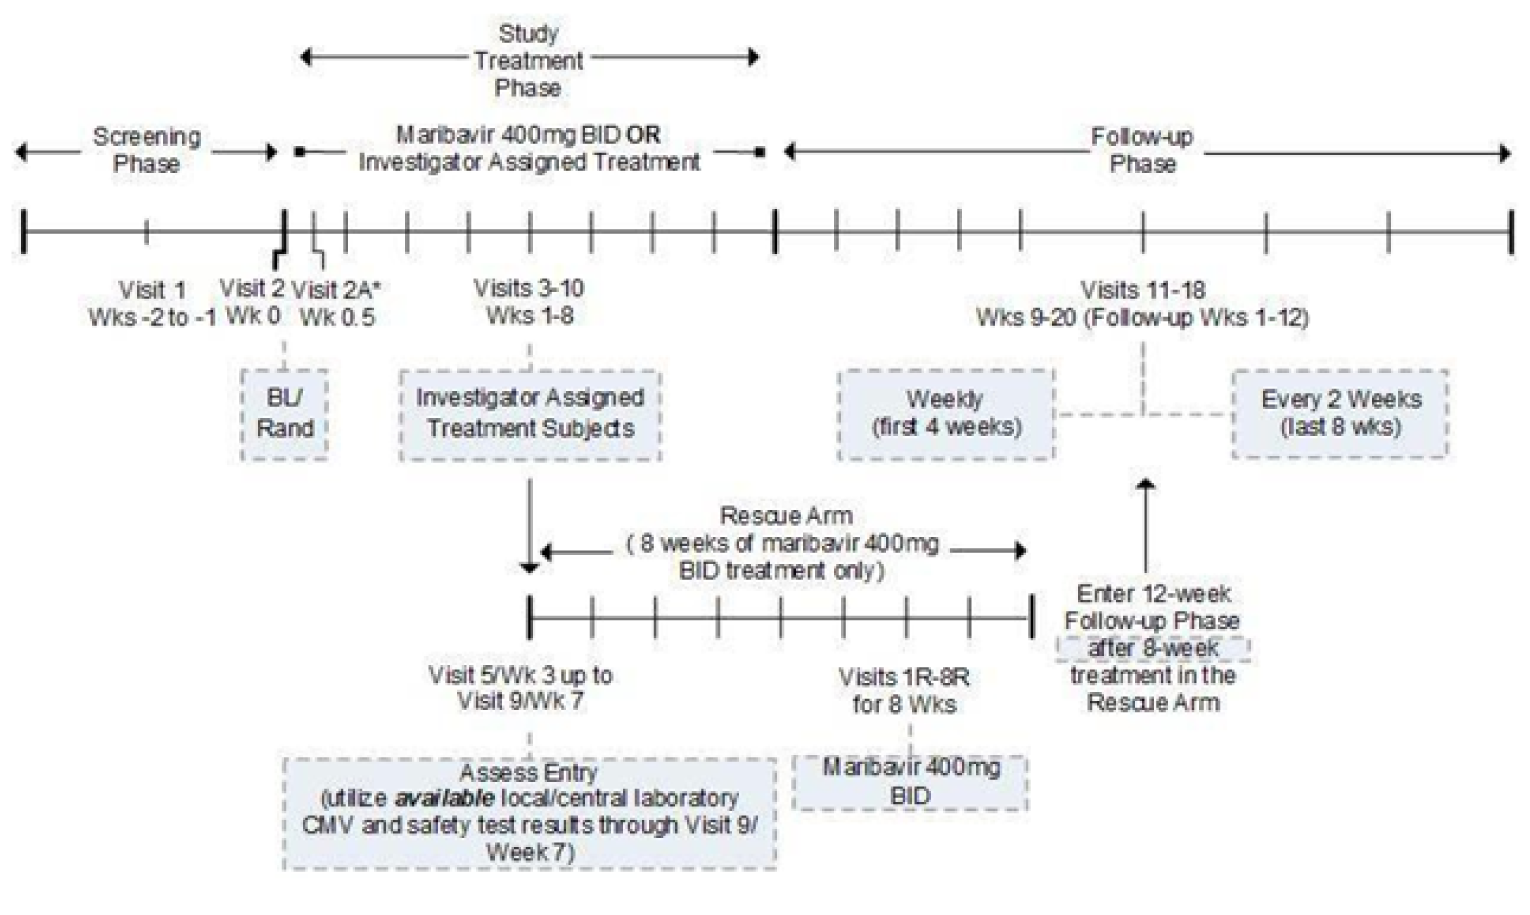 Figure 2 is a diagram of the timeline of the SOLSTIC study. After the screening phase, enrolled patients were randomized into either the maribavir or the IAT group. Patients received treatment for 8 weeks. After the treatment phase, patients were followed up from week 9 to week 20. At week 3, patients on the IAT were assessed for eligibility to join the maribavir rescue arm.